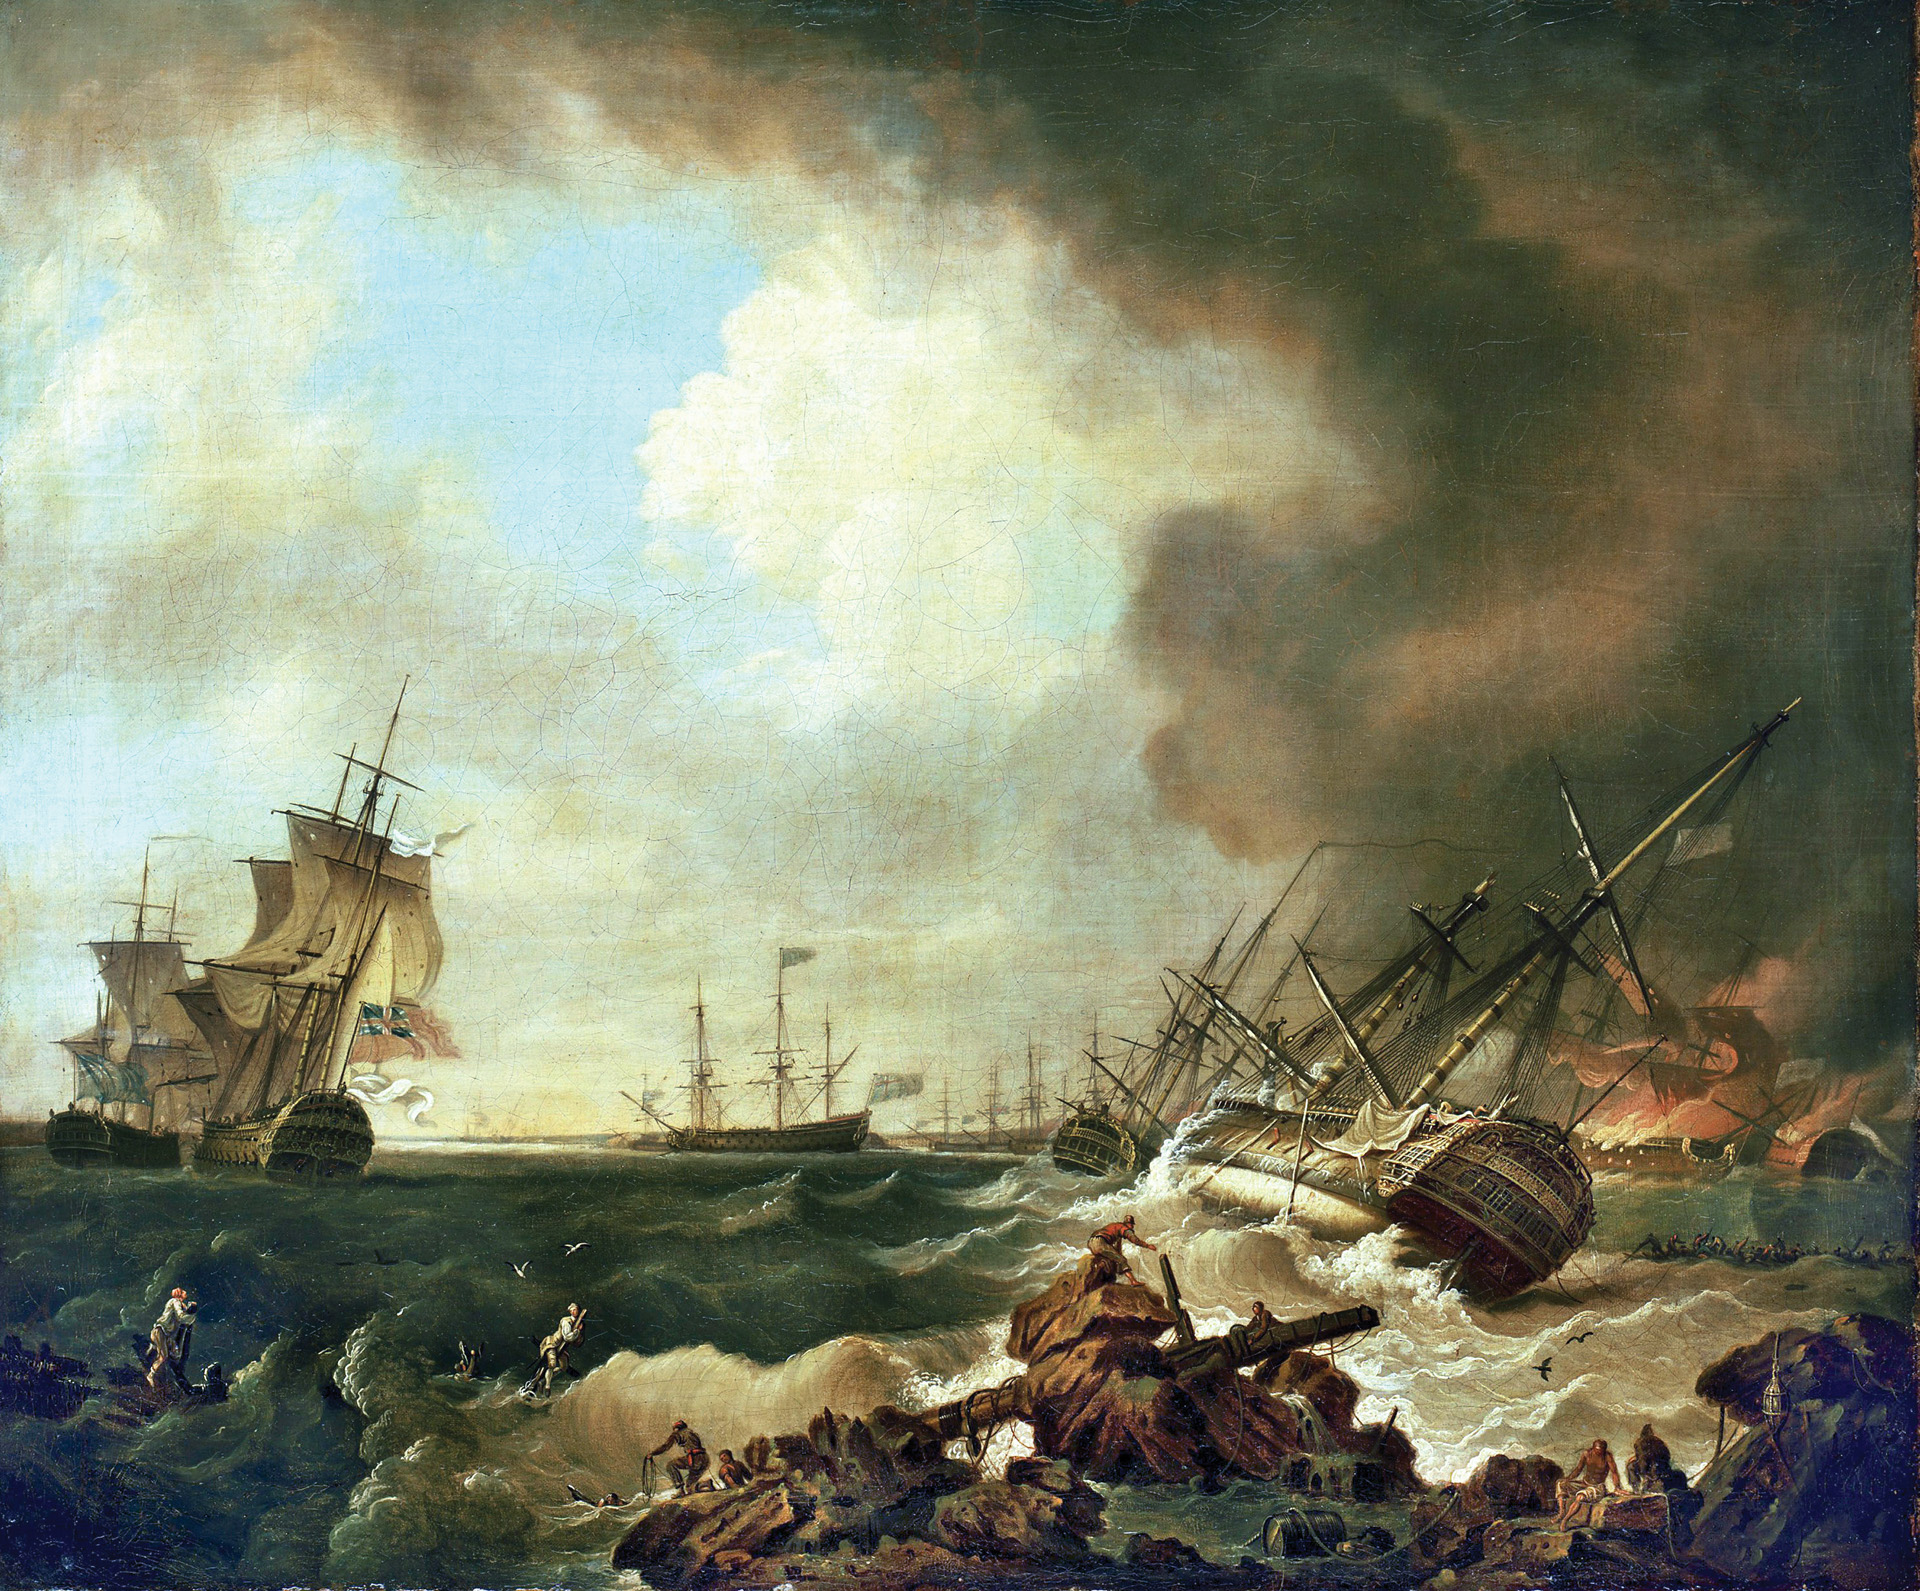 The French lost six ships of the line in the action at Quiberon Bay, one of which was Conflans’ flagship Soleil Royal, as well as all hope of invading Britain.